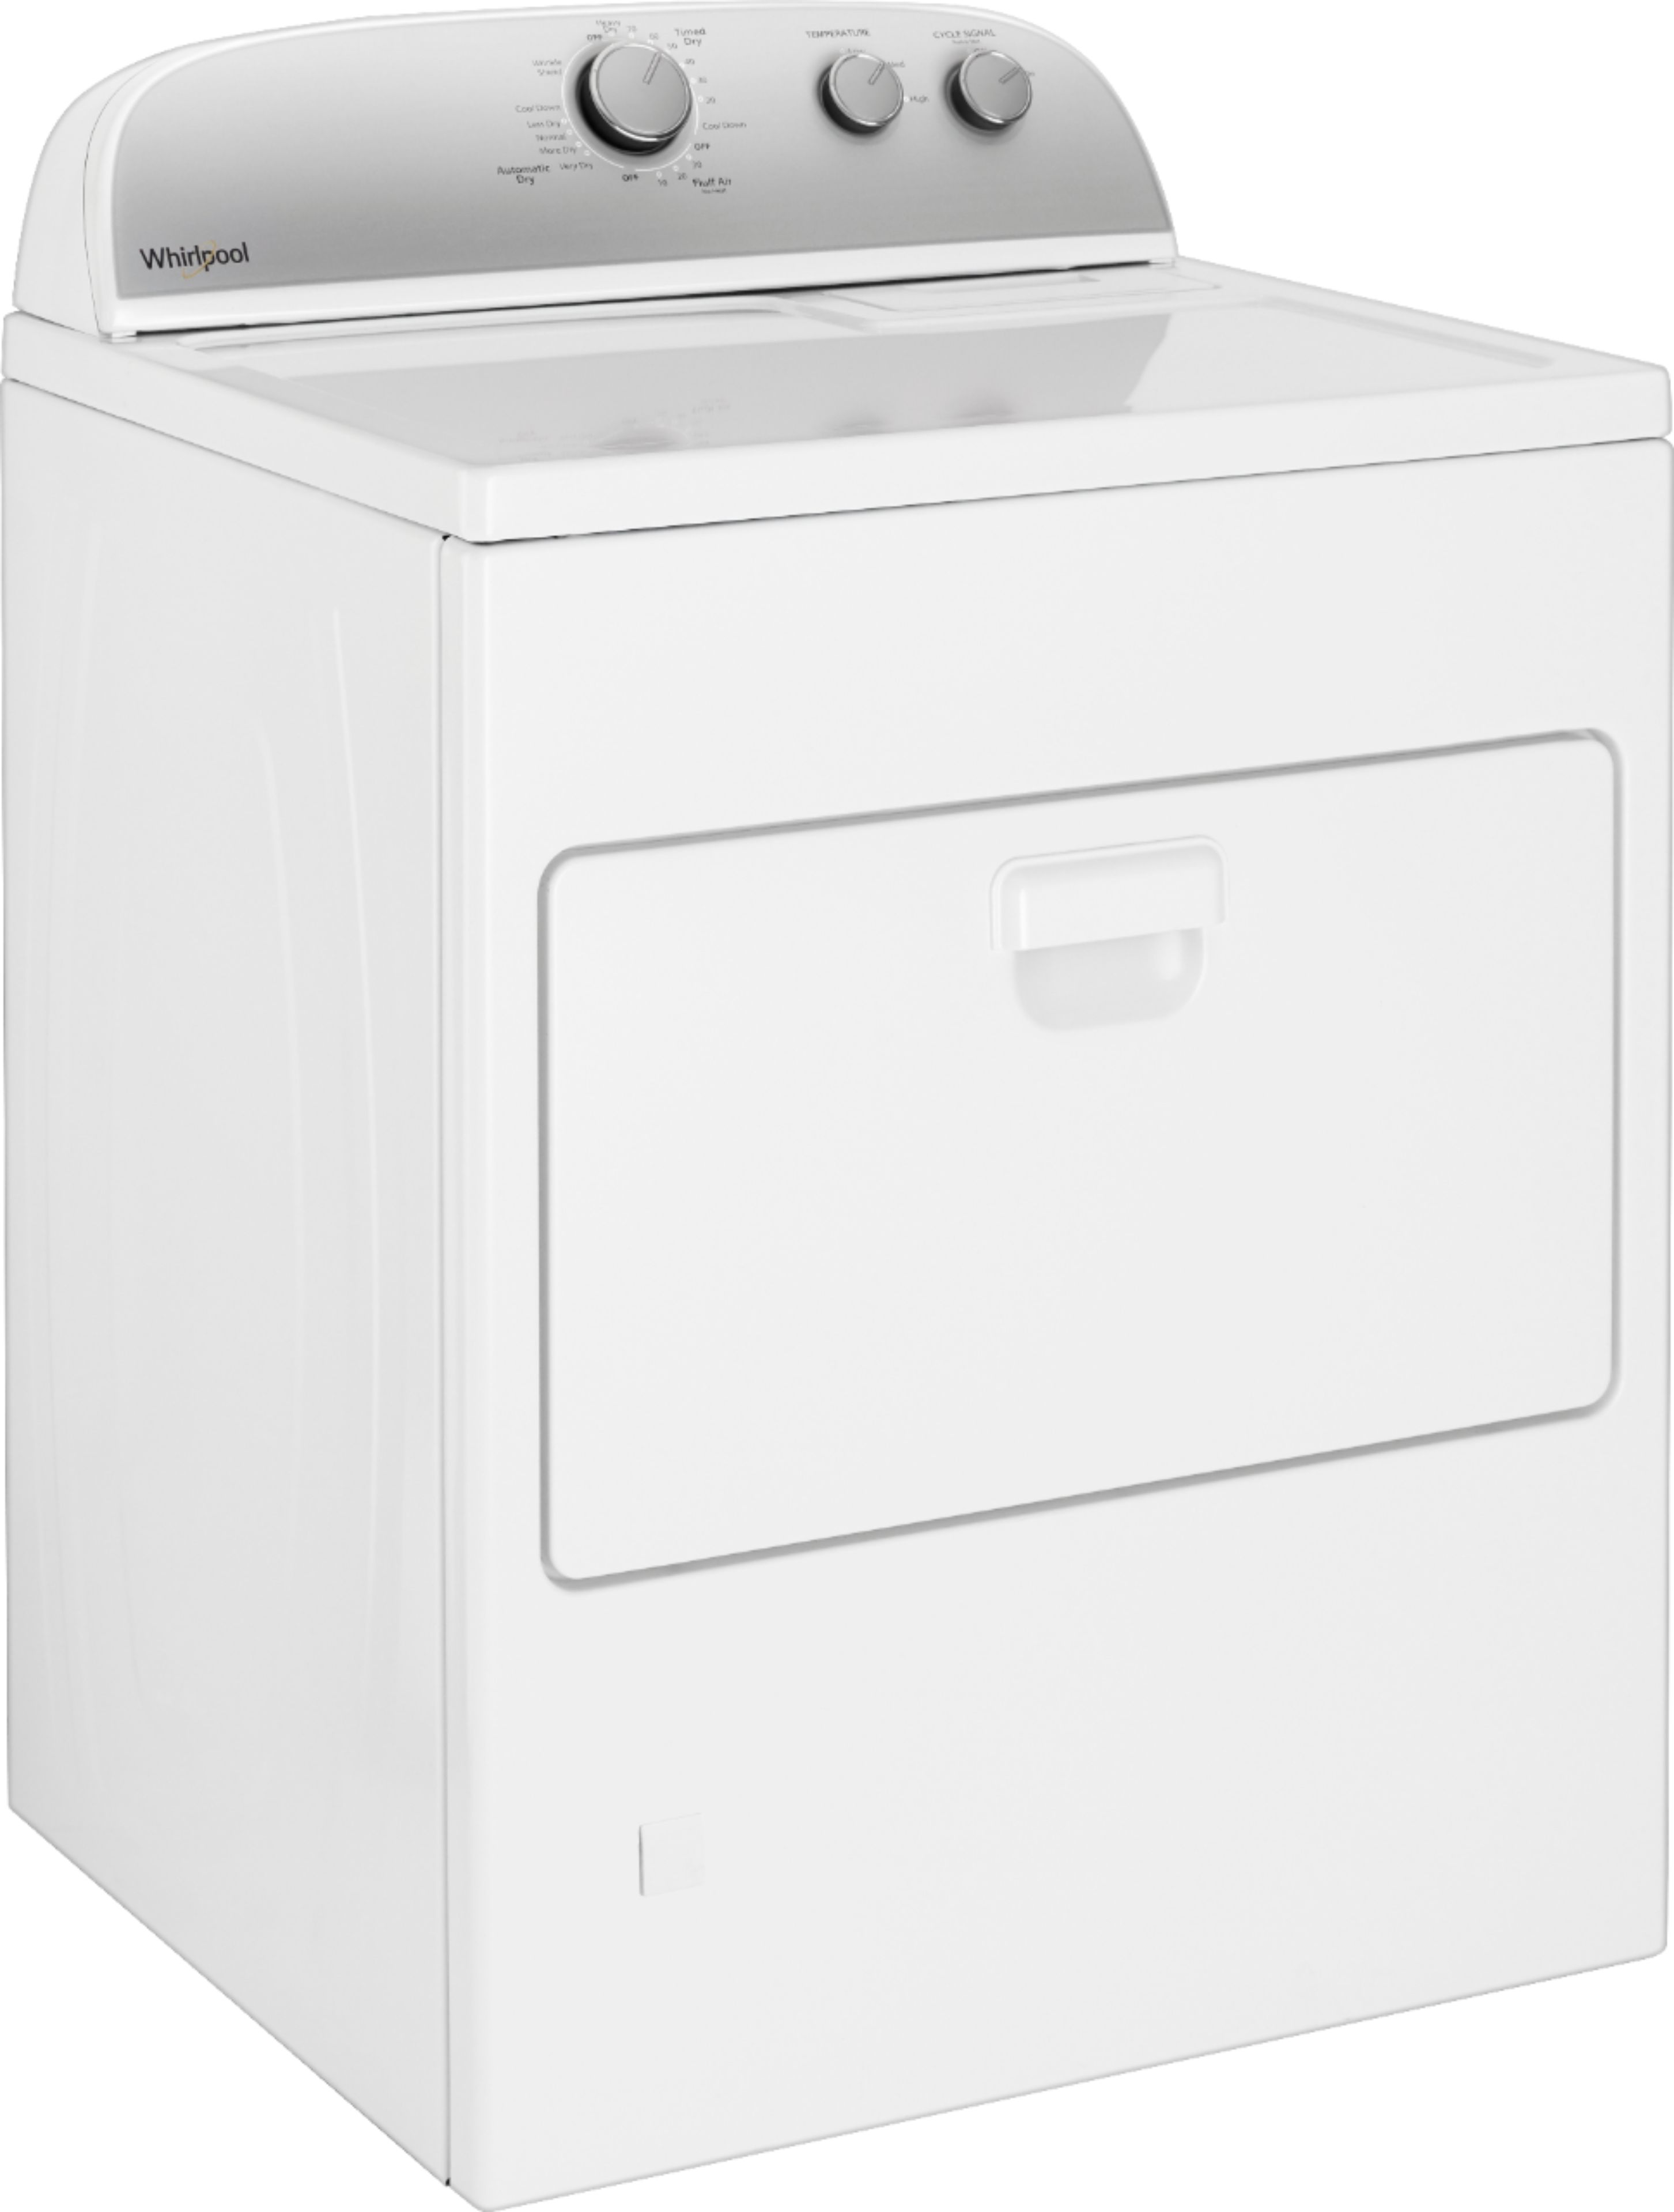 Angle View: Whirlpool - 7.4 Cu. Ft. Gas Dryer with Space Saving Design - White